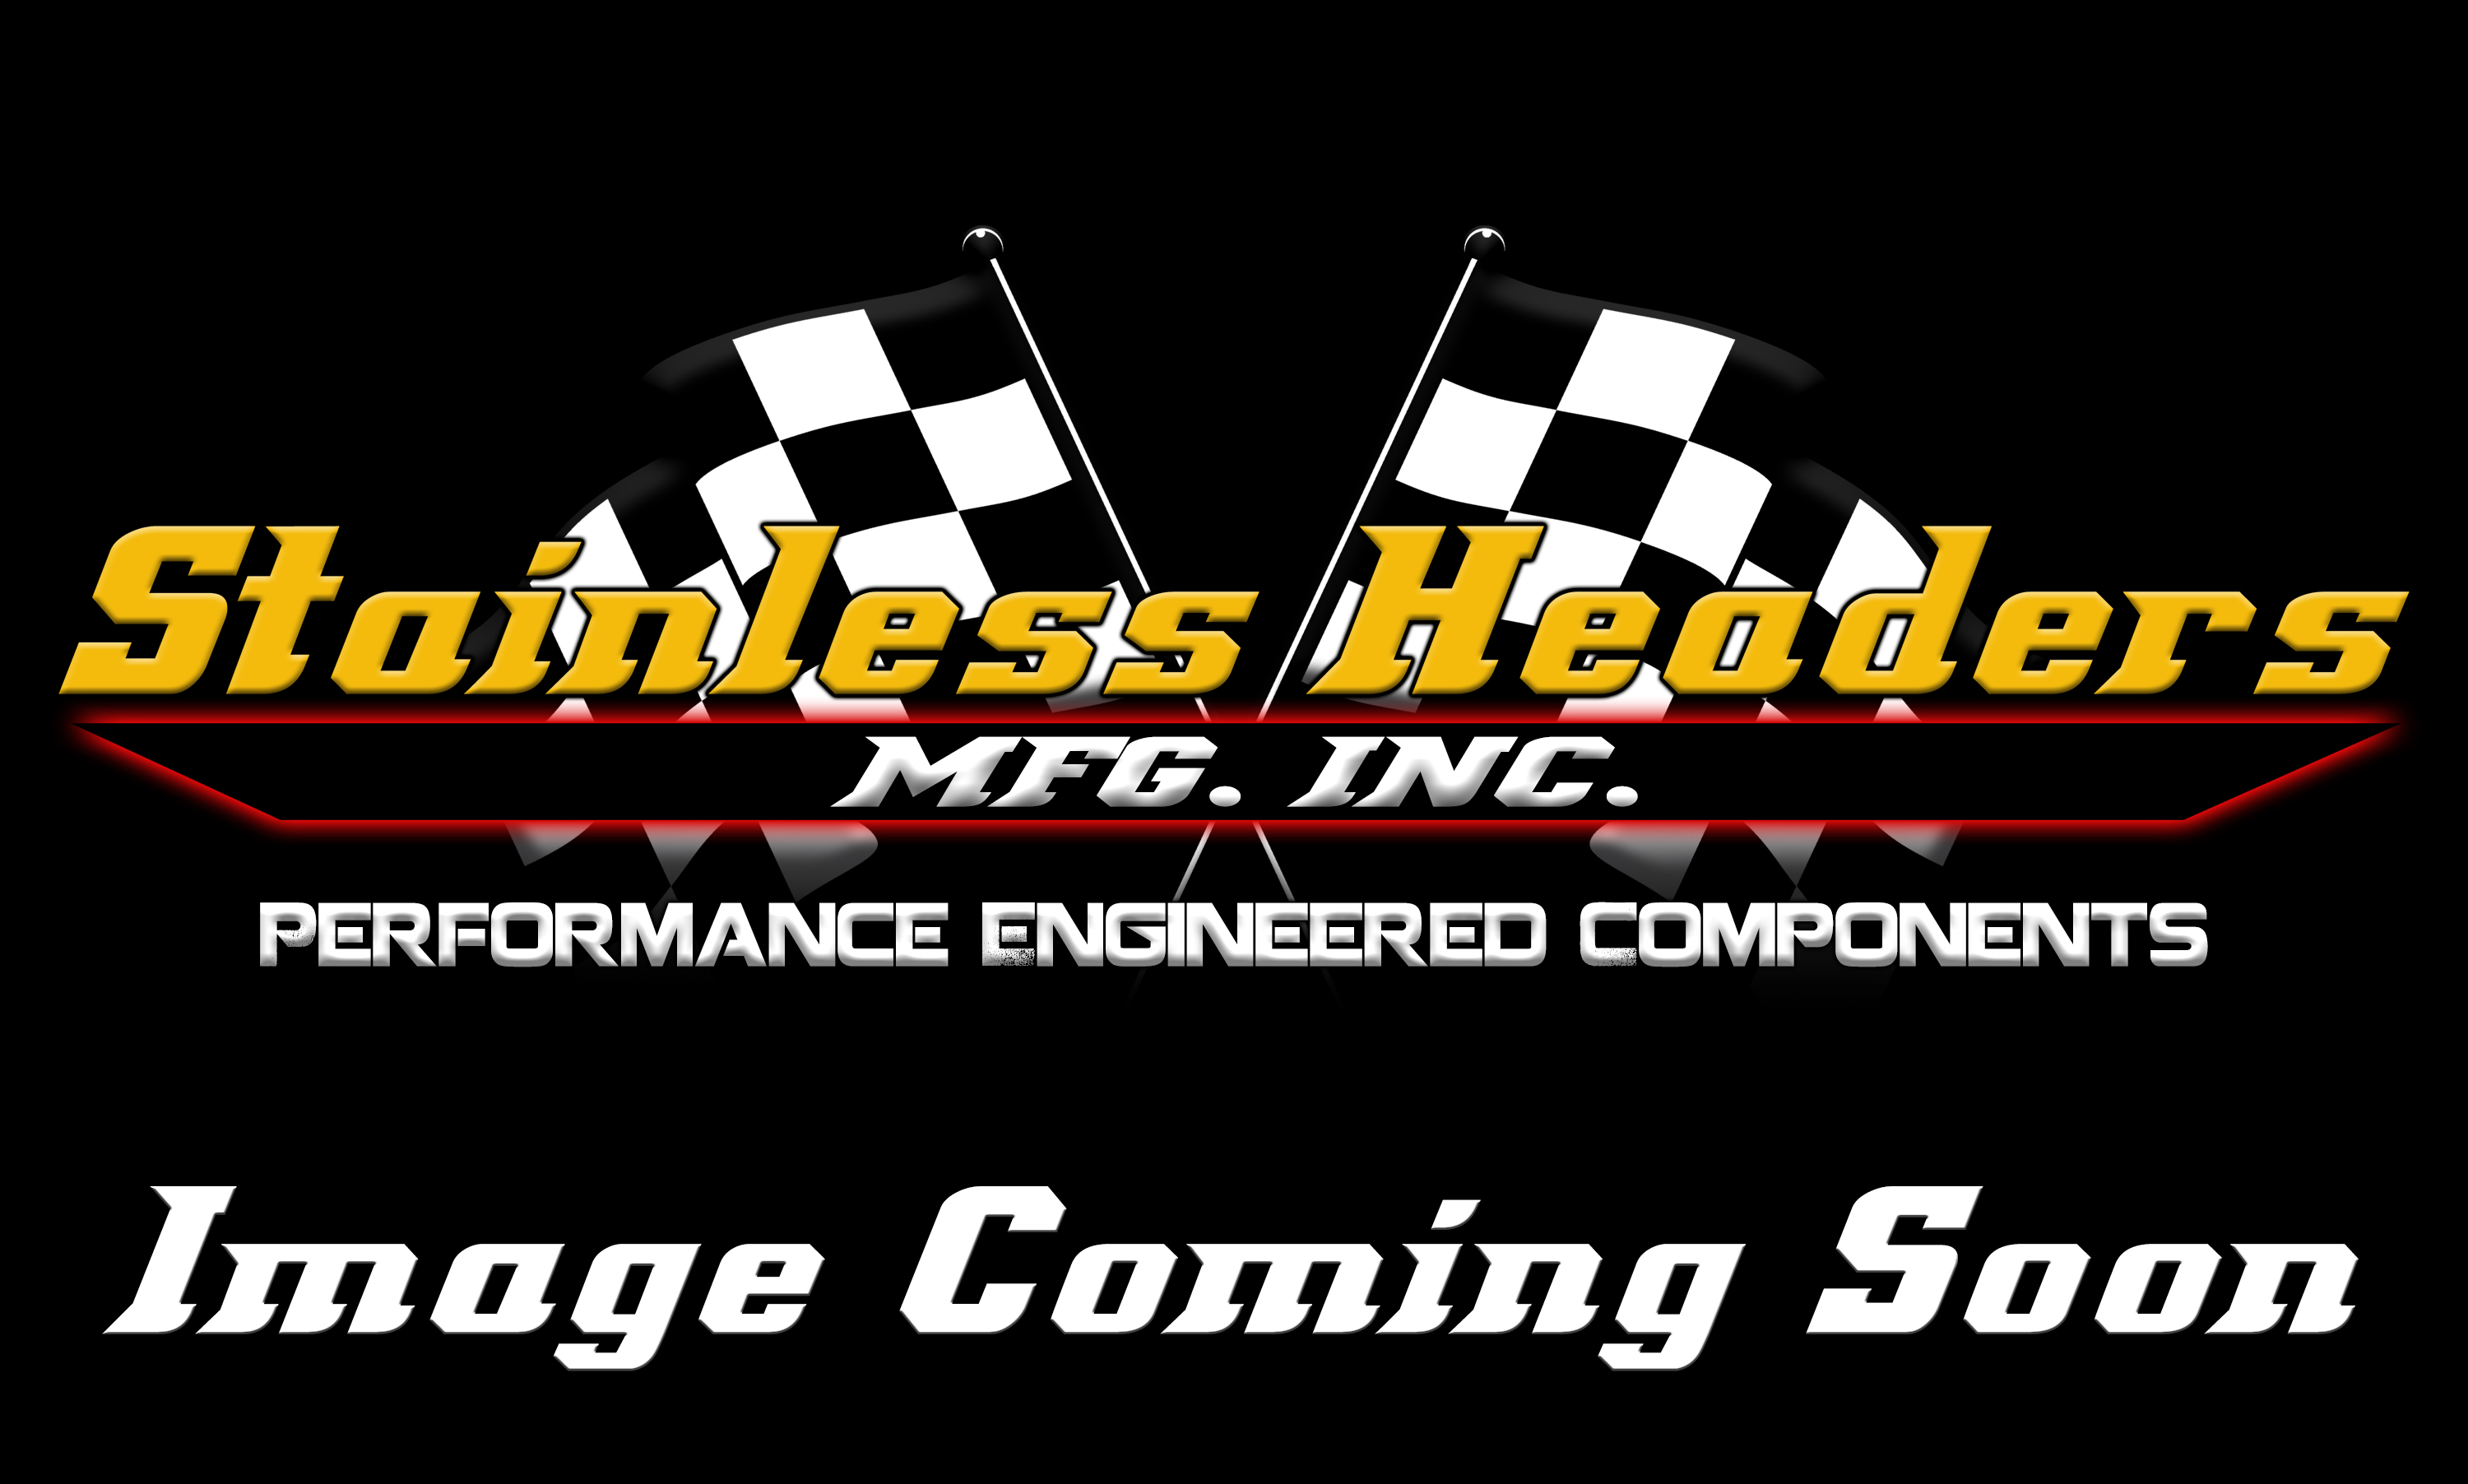 Custom Header Components - Merge Collectors - Stainless Headers - 1 3/4" Primary 4 into 1 Performance Merge Collector-16ga 321ss